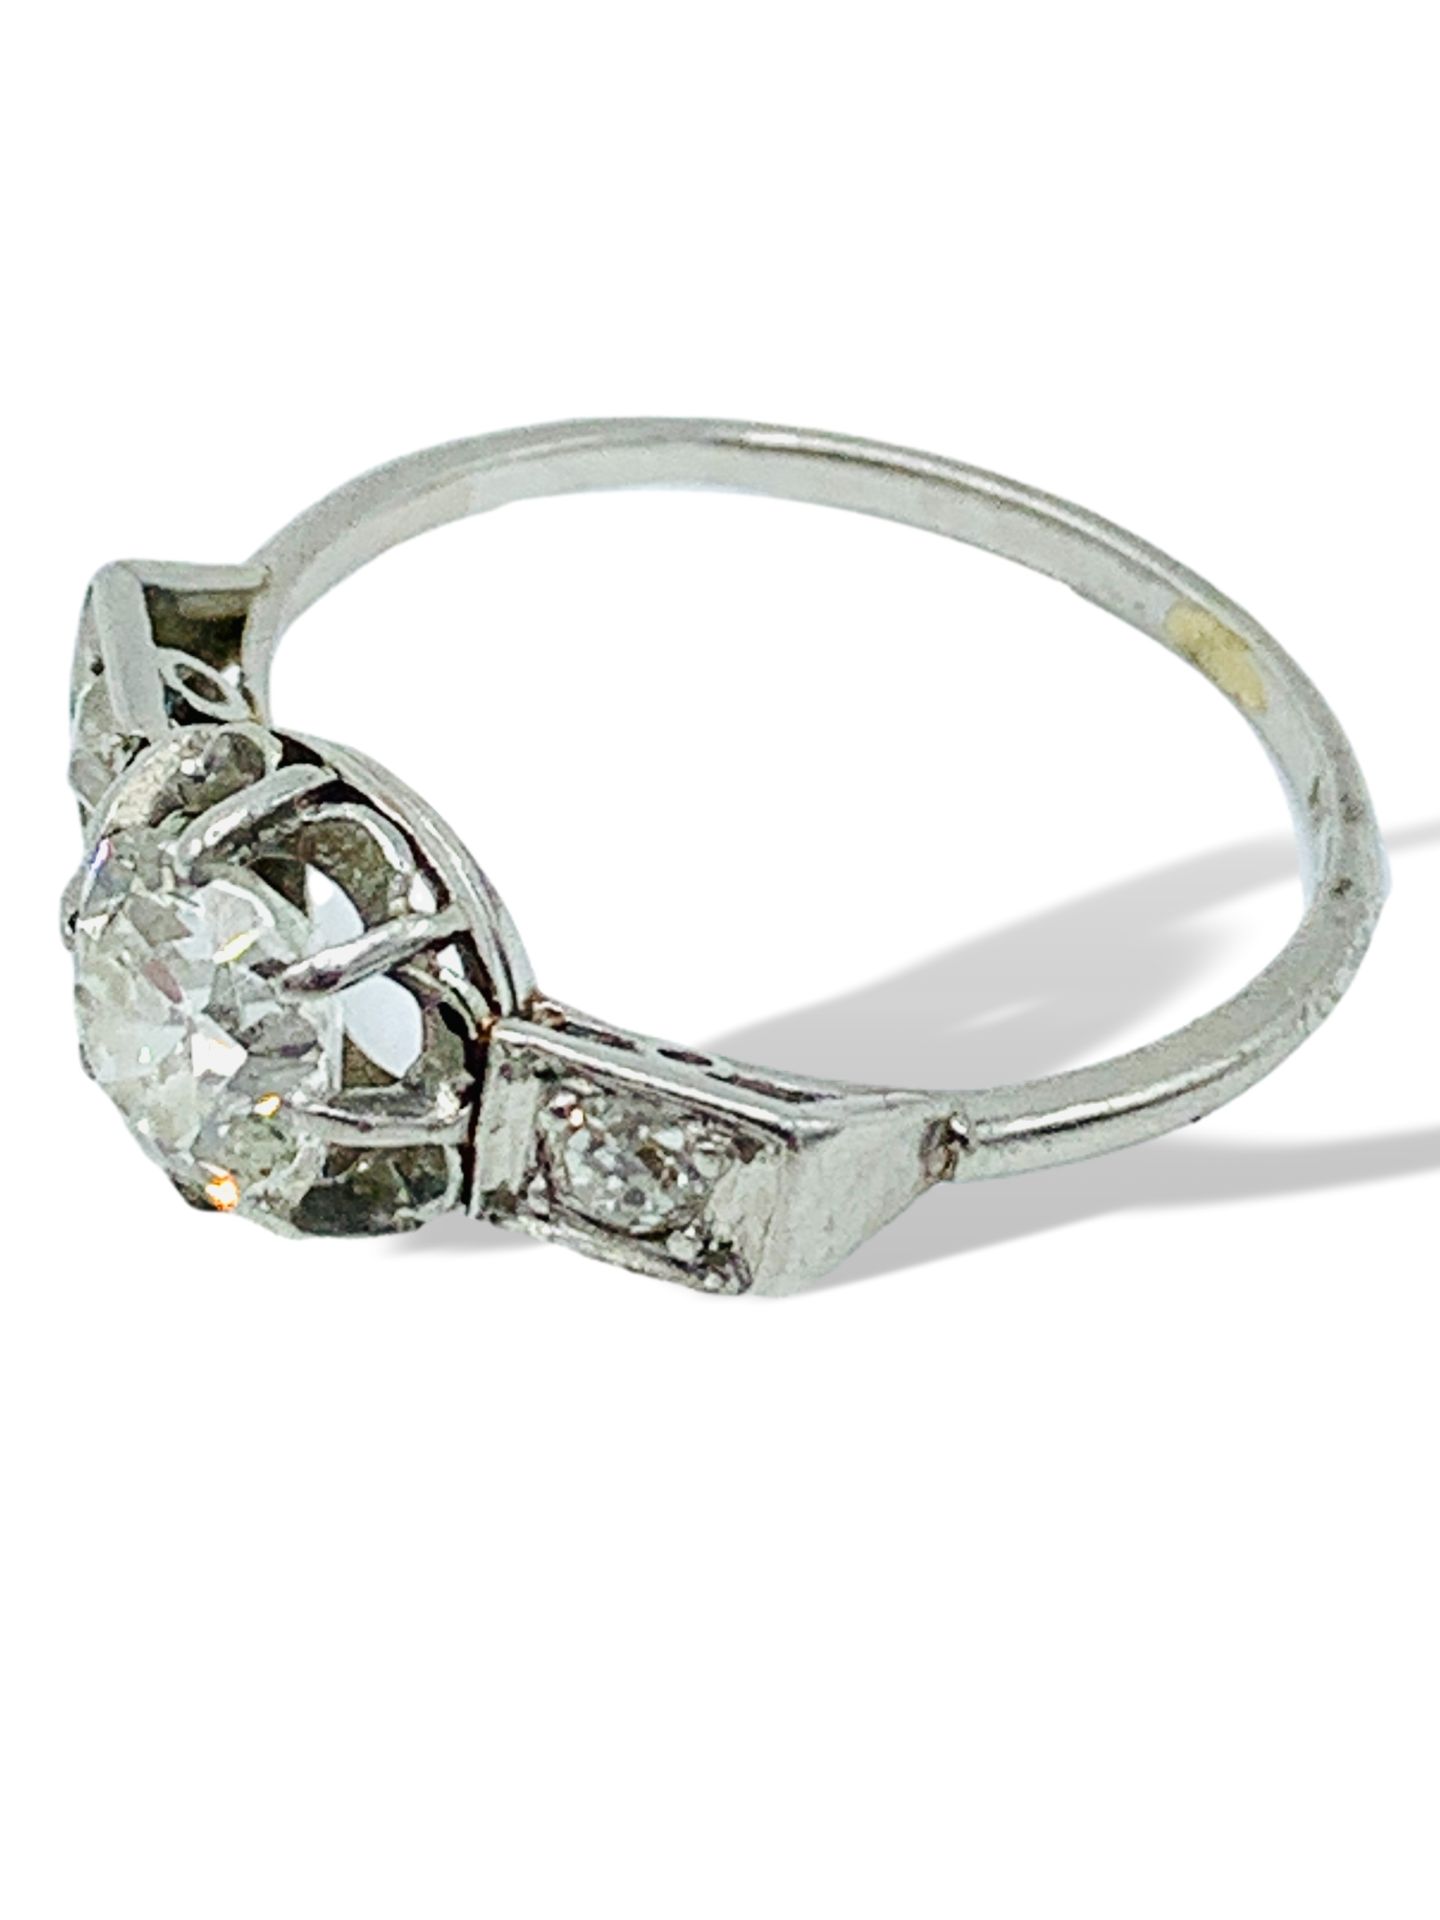 18ct white gold single stone diamond ring with diamond shoulders - Image 2 of 8